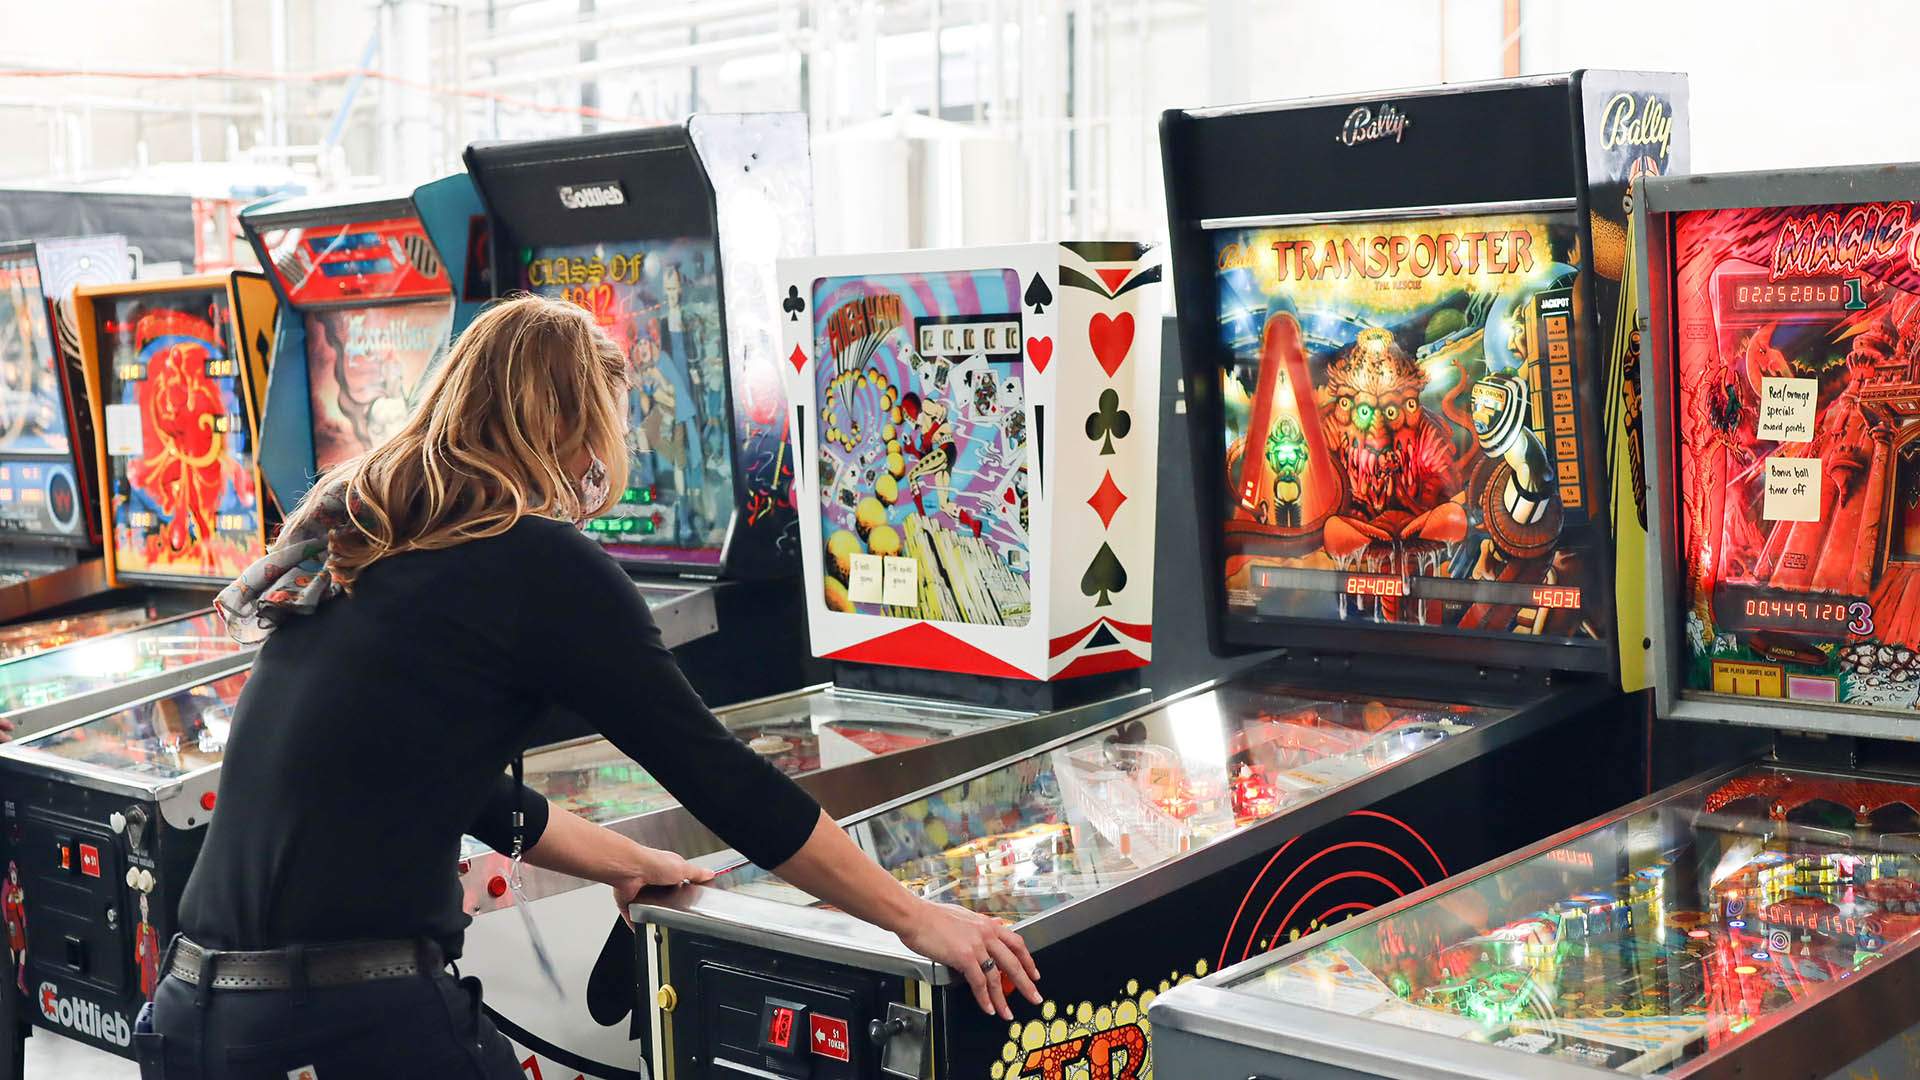 A Massive Pinball, Arcade and Gaming Festival Is Taking Over BrewDog's Riverside Brewery for Ten Days